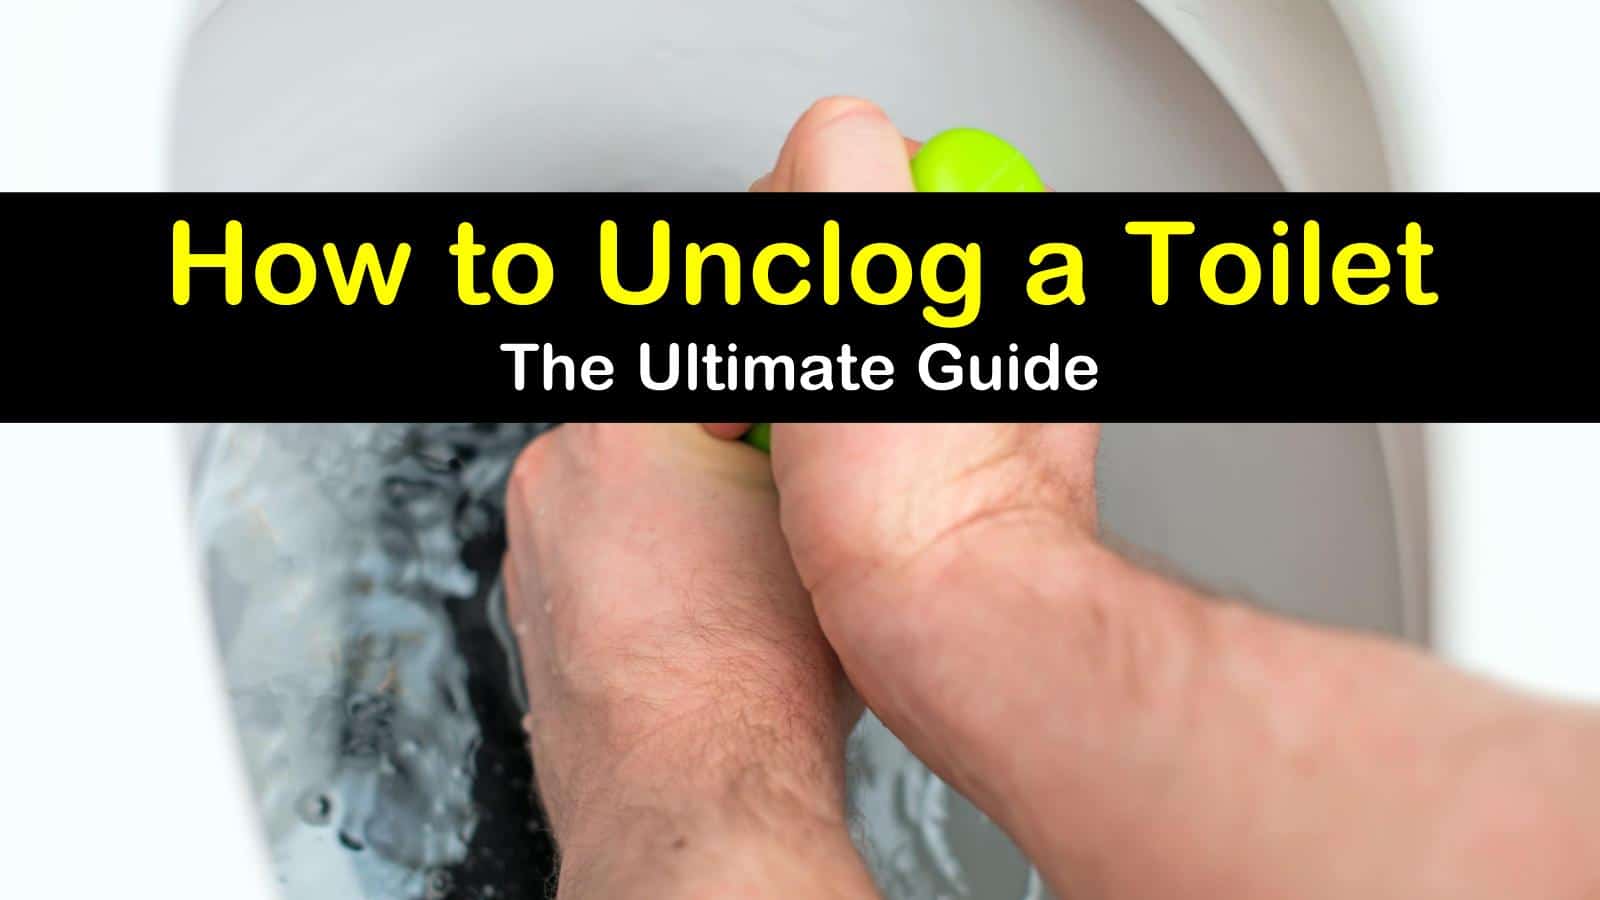 https://www.tipsbulletin.com/wp-content/uploads/2019/05/how-to-unclog-a-toilet-t1.jpg